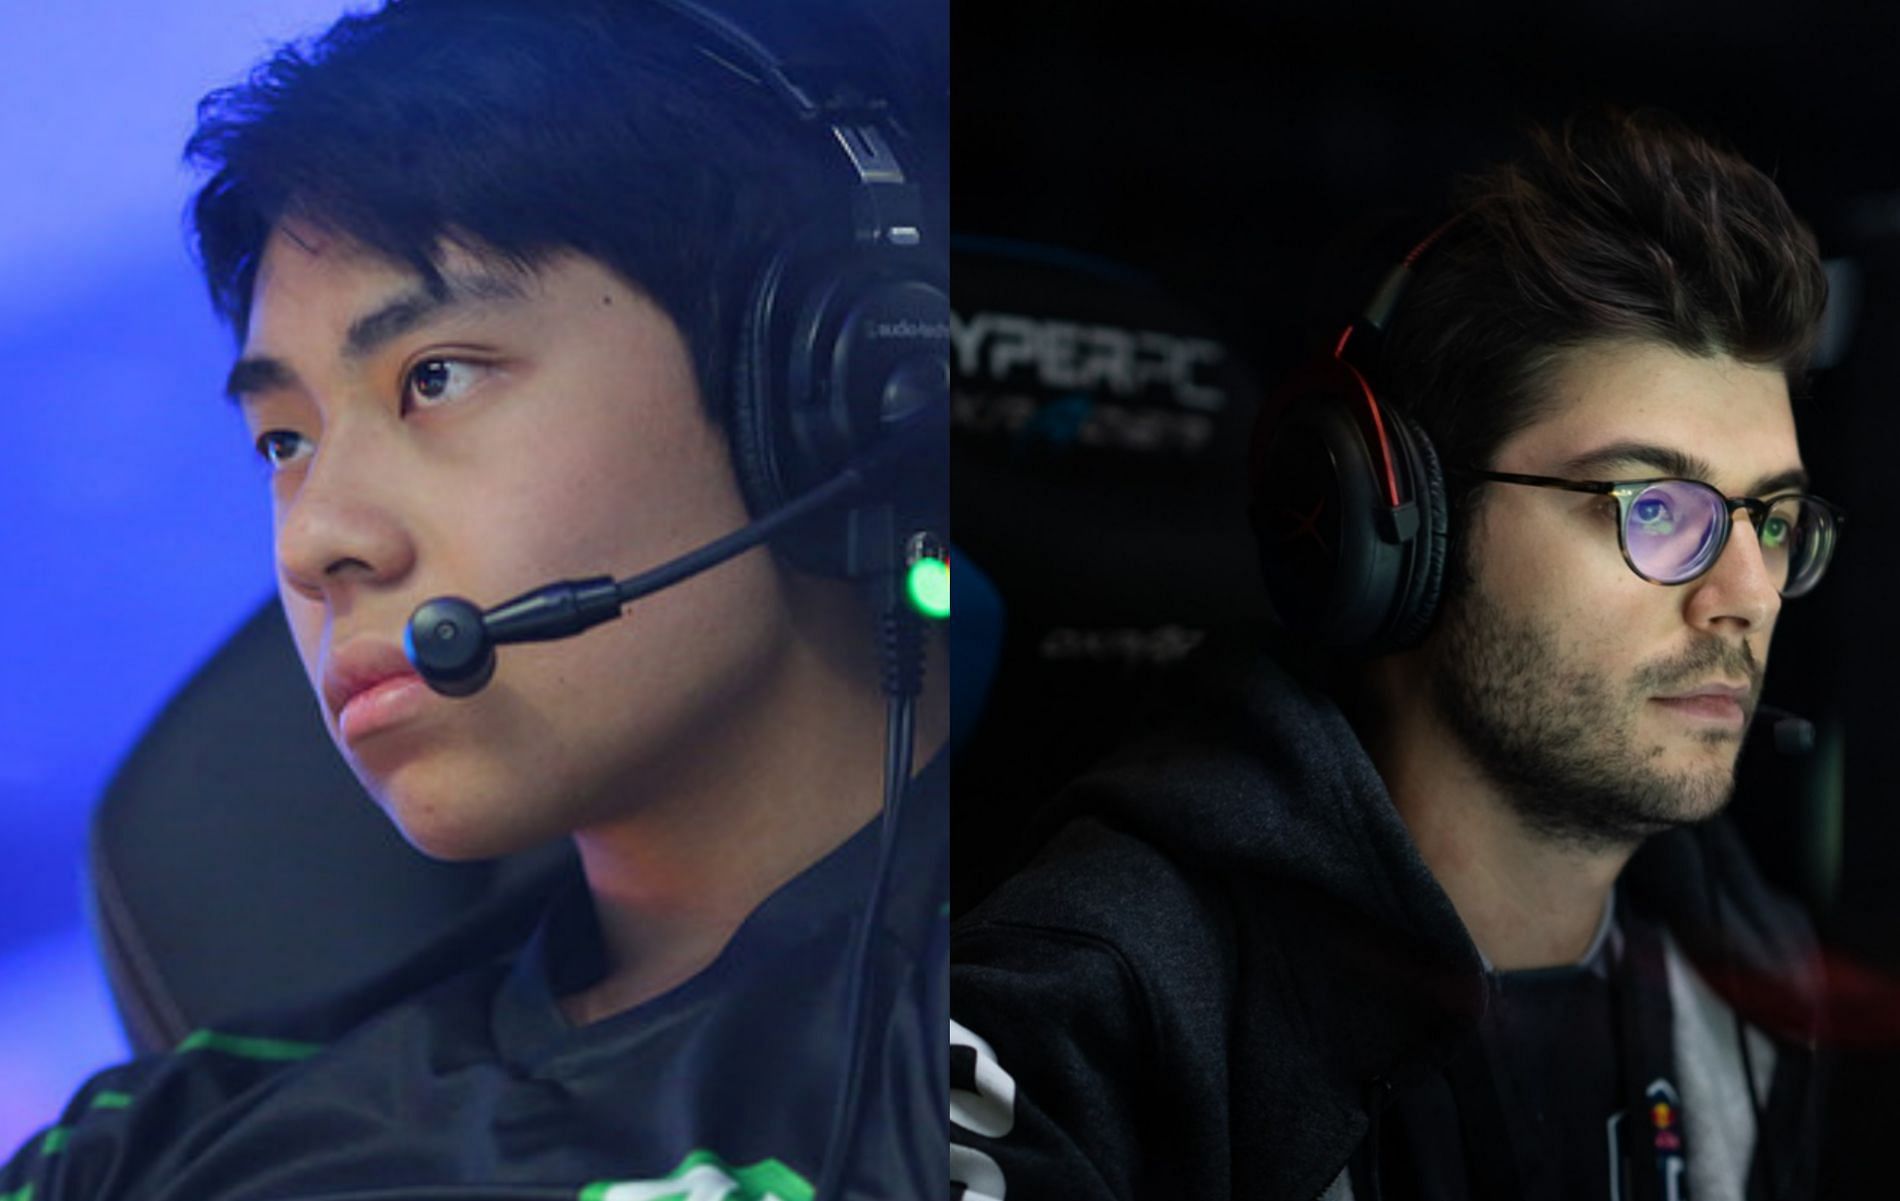 Ana, Ceb and more changes due to visa issues (Images via liquipedia)